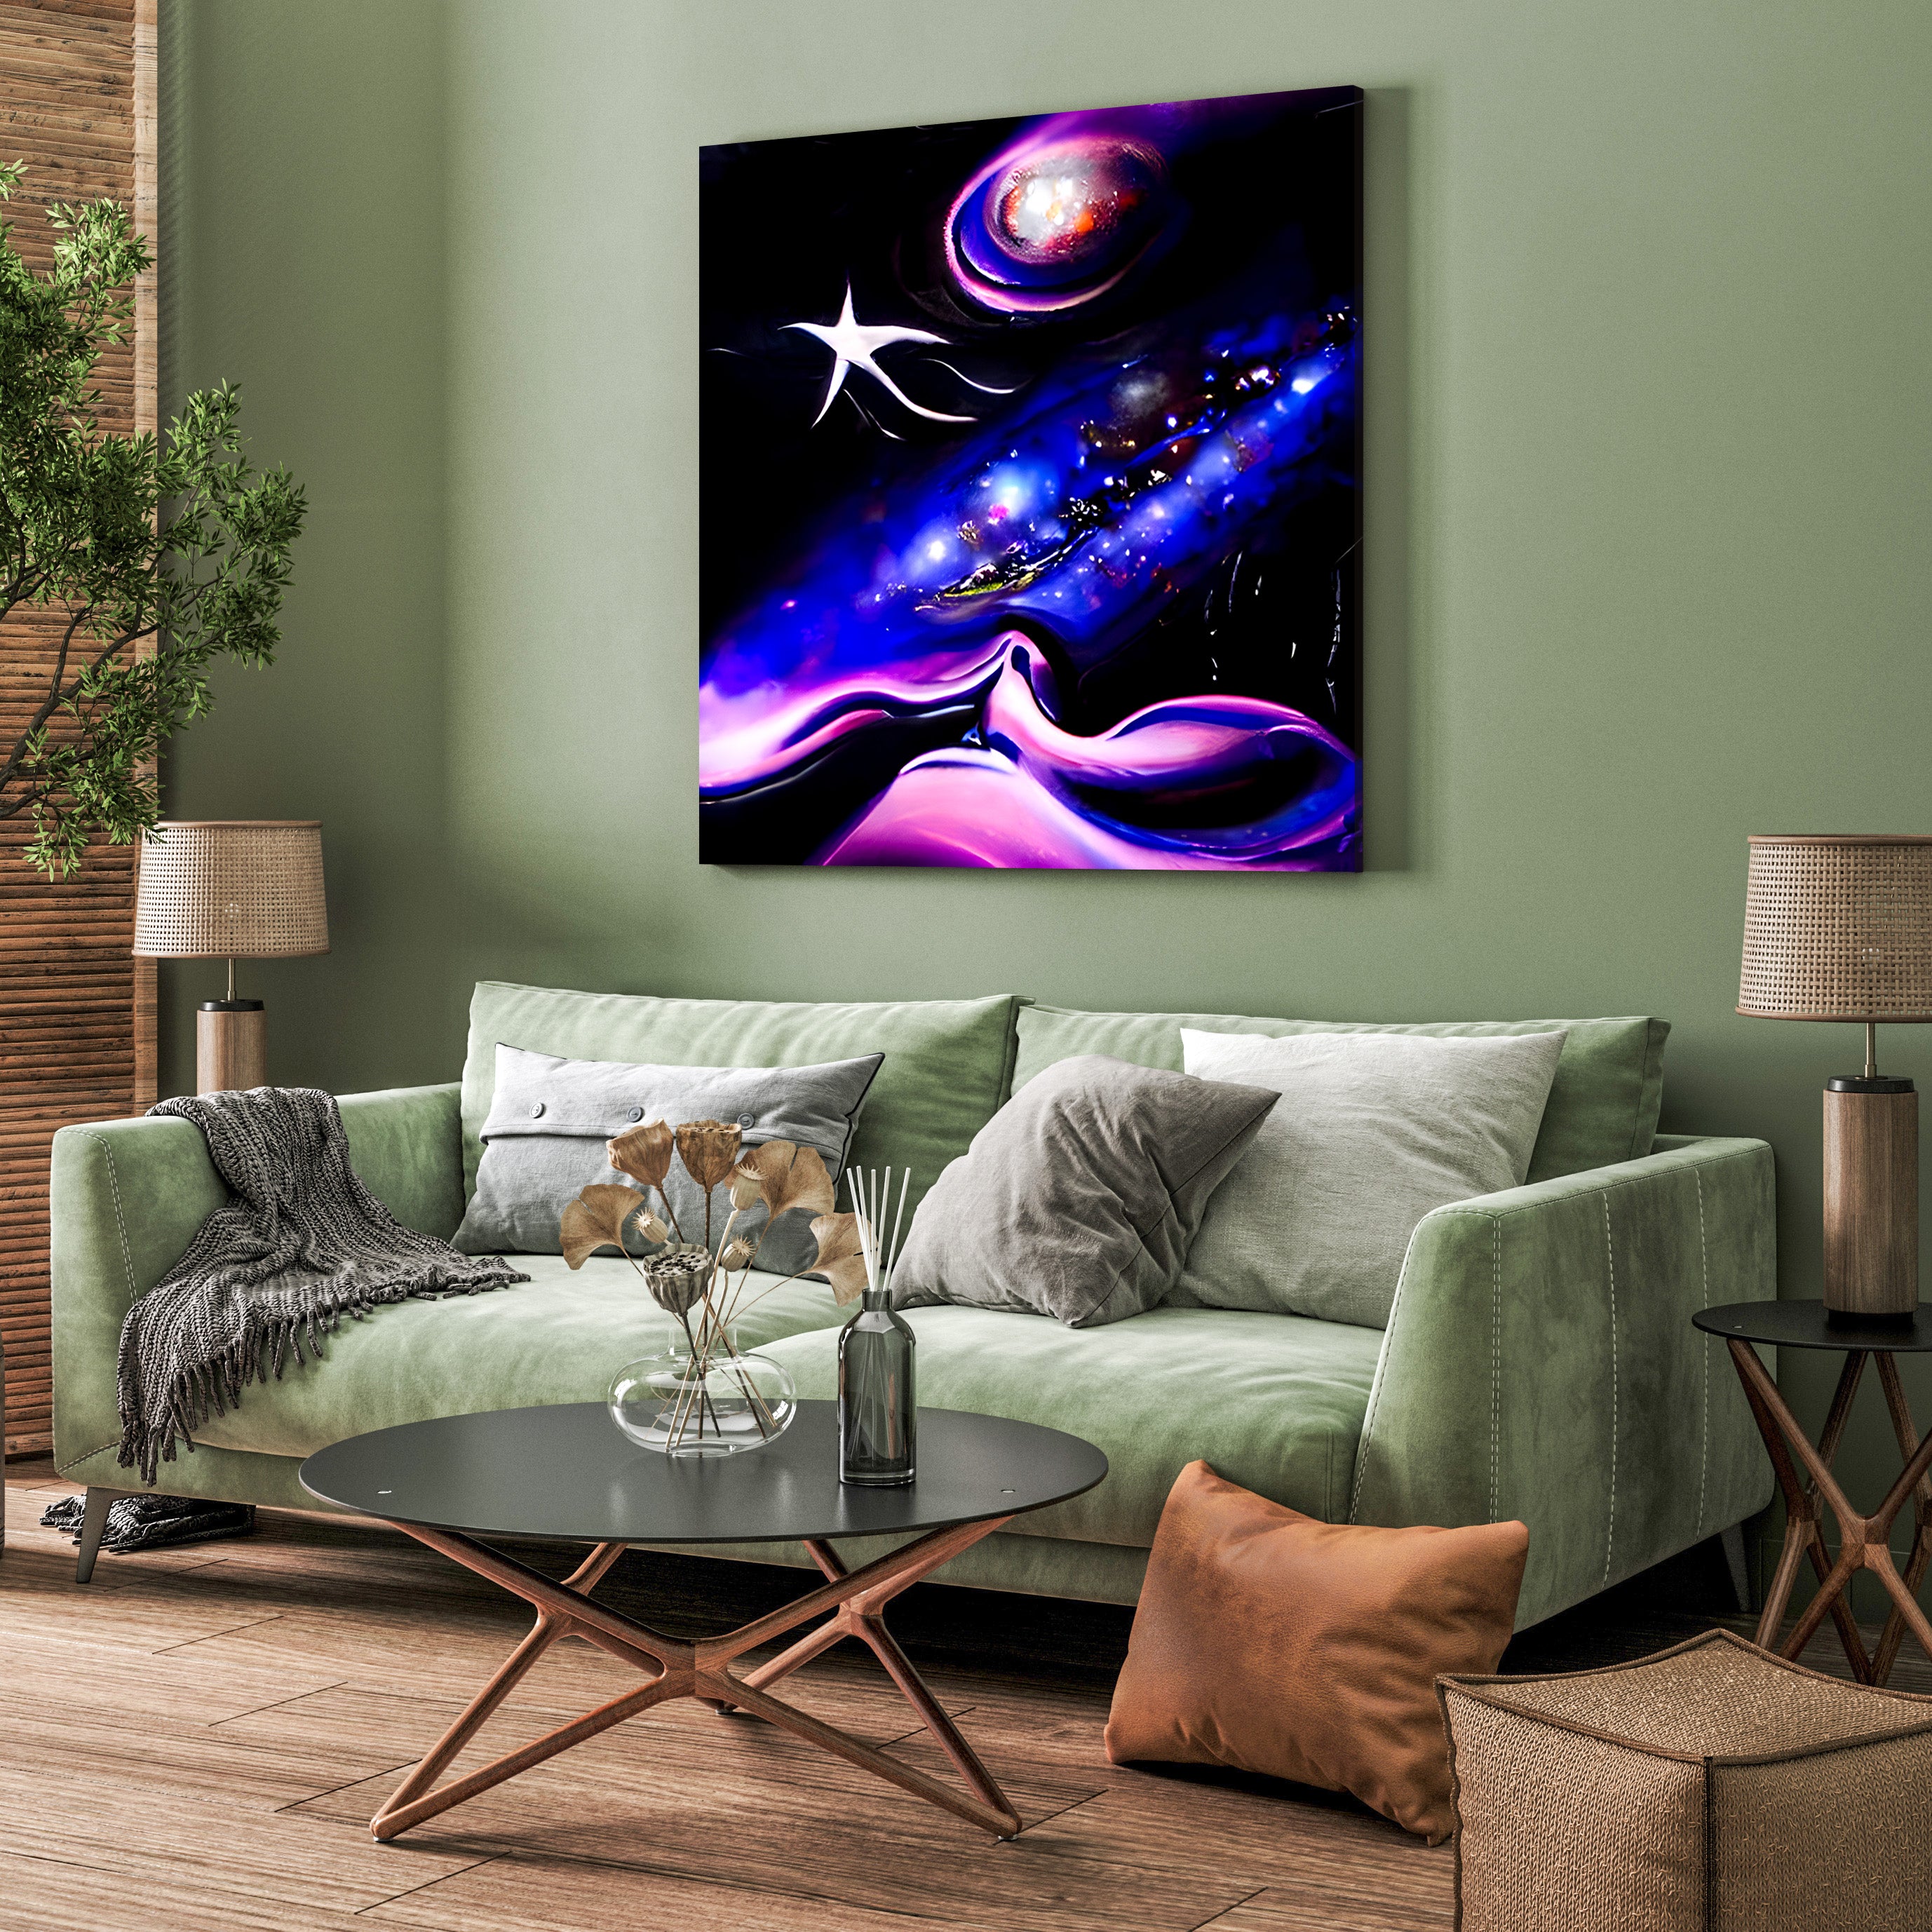 When Midnight sighs infinity cosmic space radiant airbrush art acrylic4